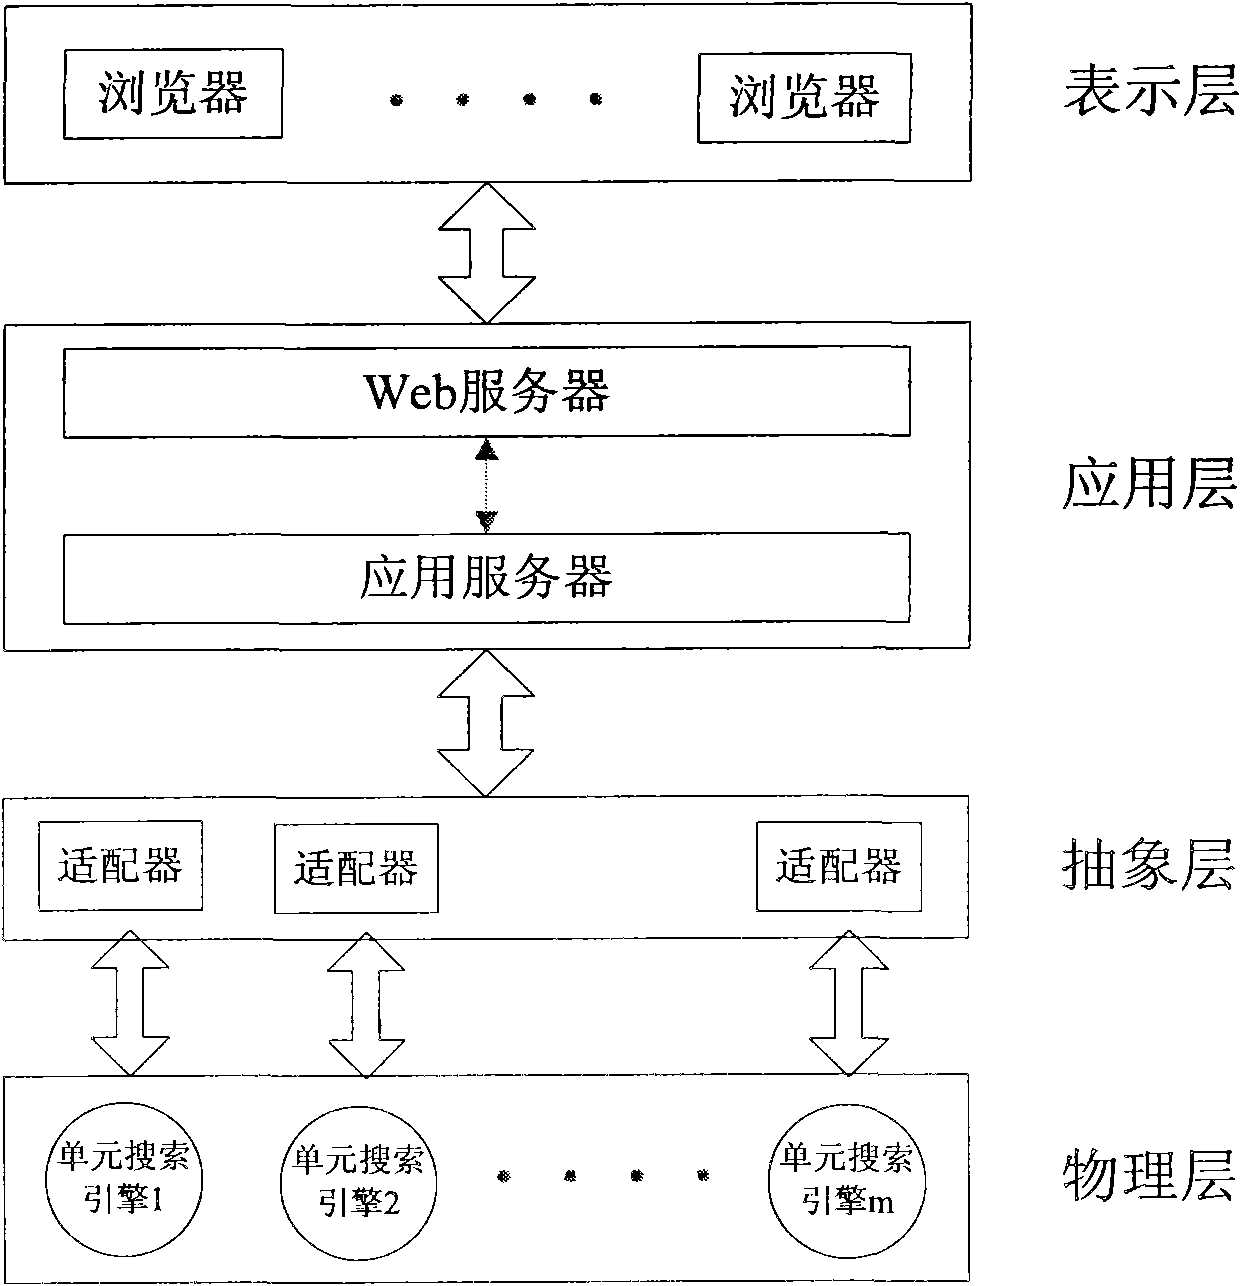 Distributed search engine system and implementation method thereof